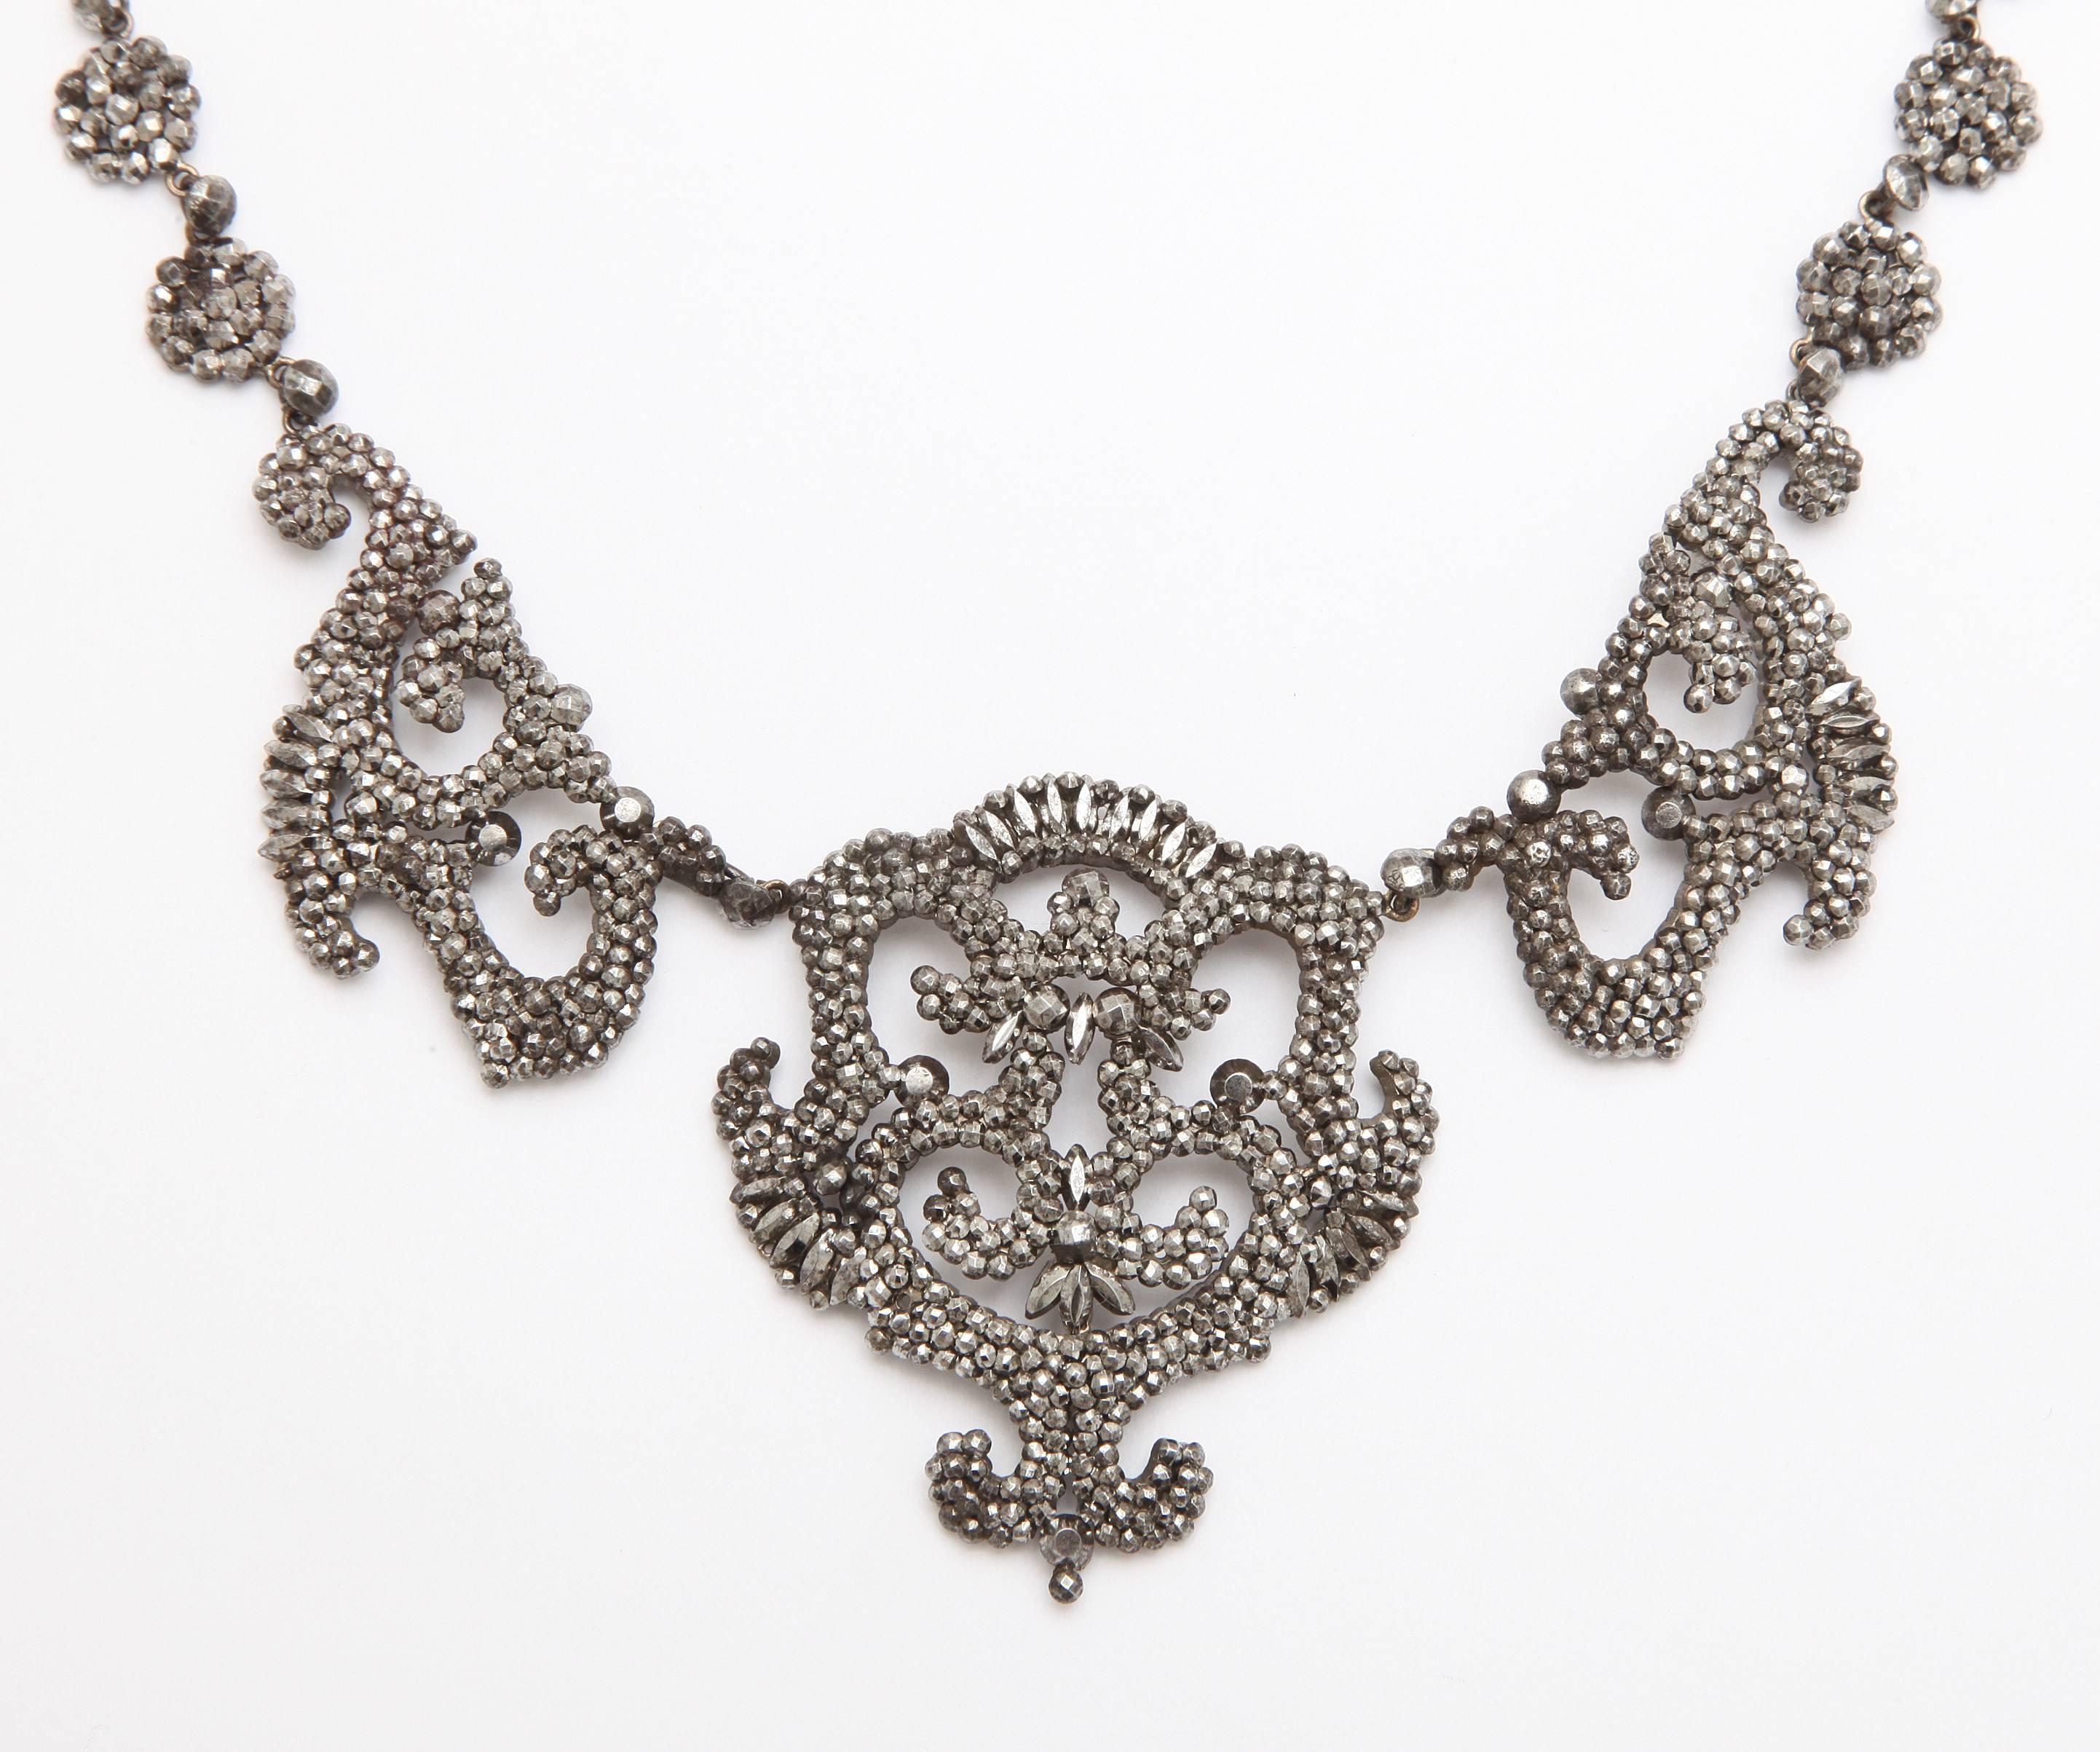 A crowning glory of design, this cut steel necklace shimmers like diamonds, in available light as it did originally in the early 1800's. Serves dressy occasions or denim shirts and blue jeans by bringing a unique sense of style with its varied cuts